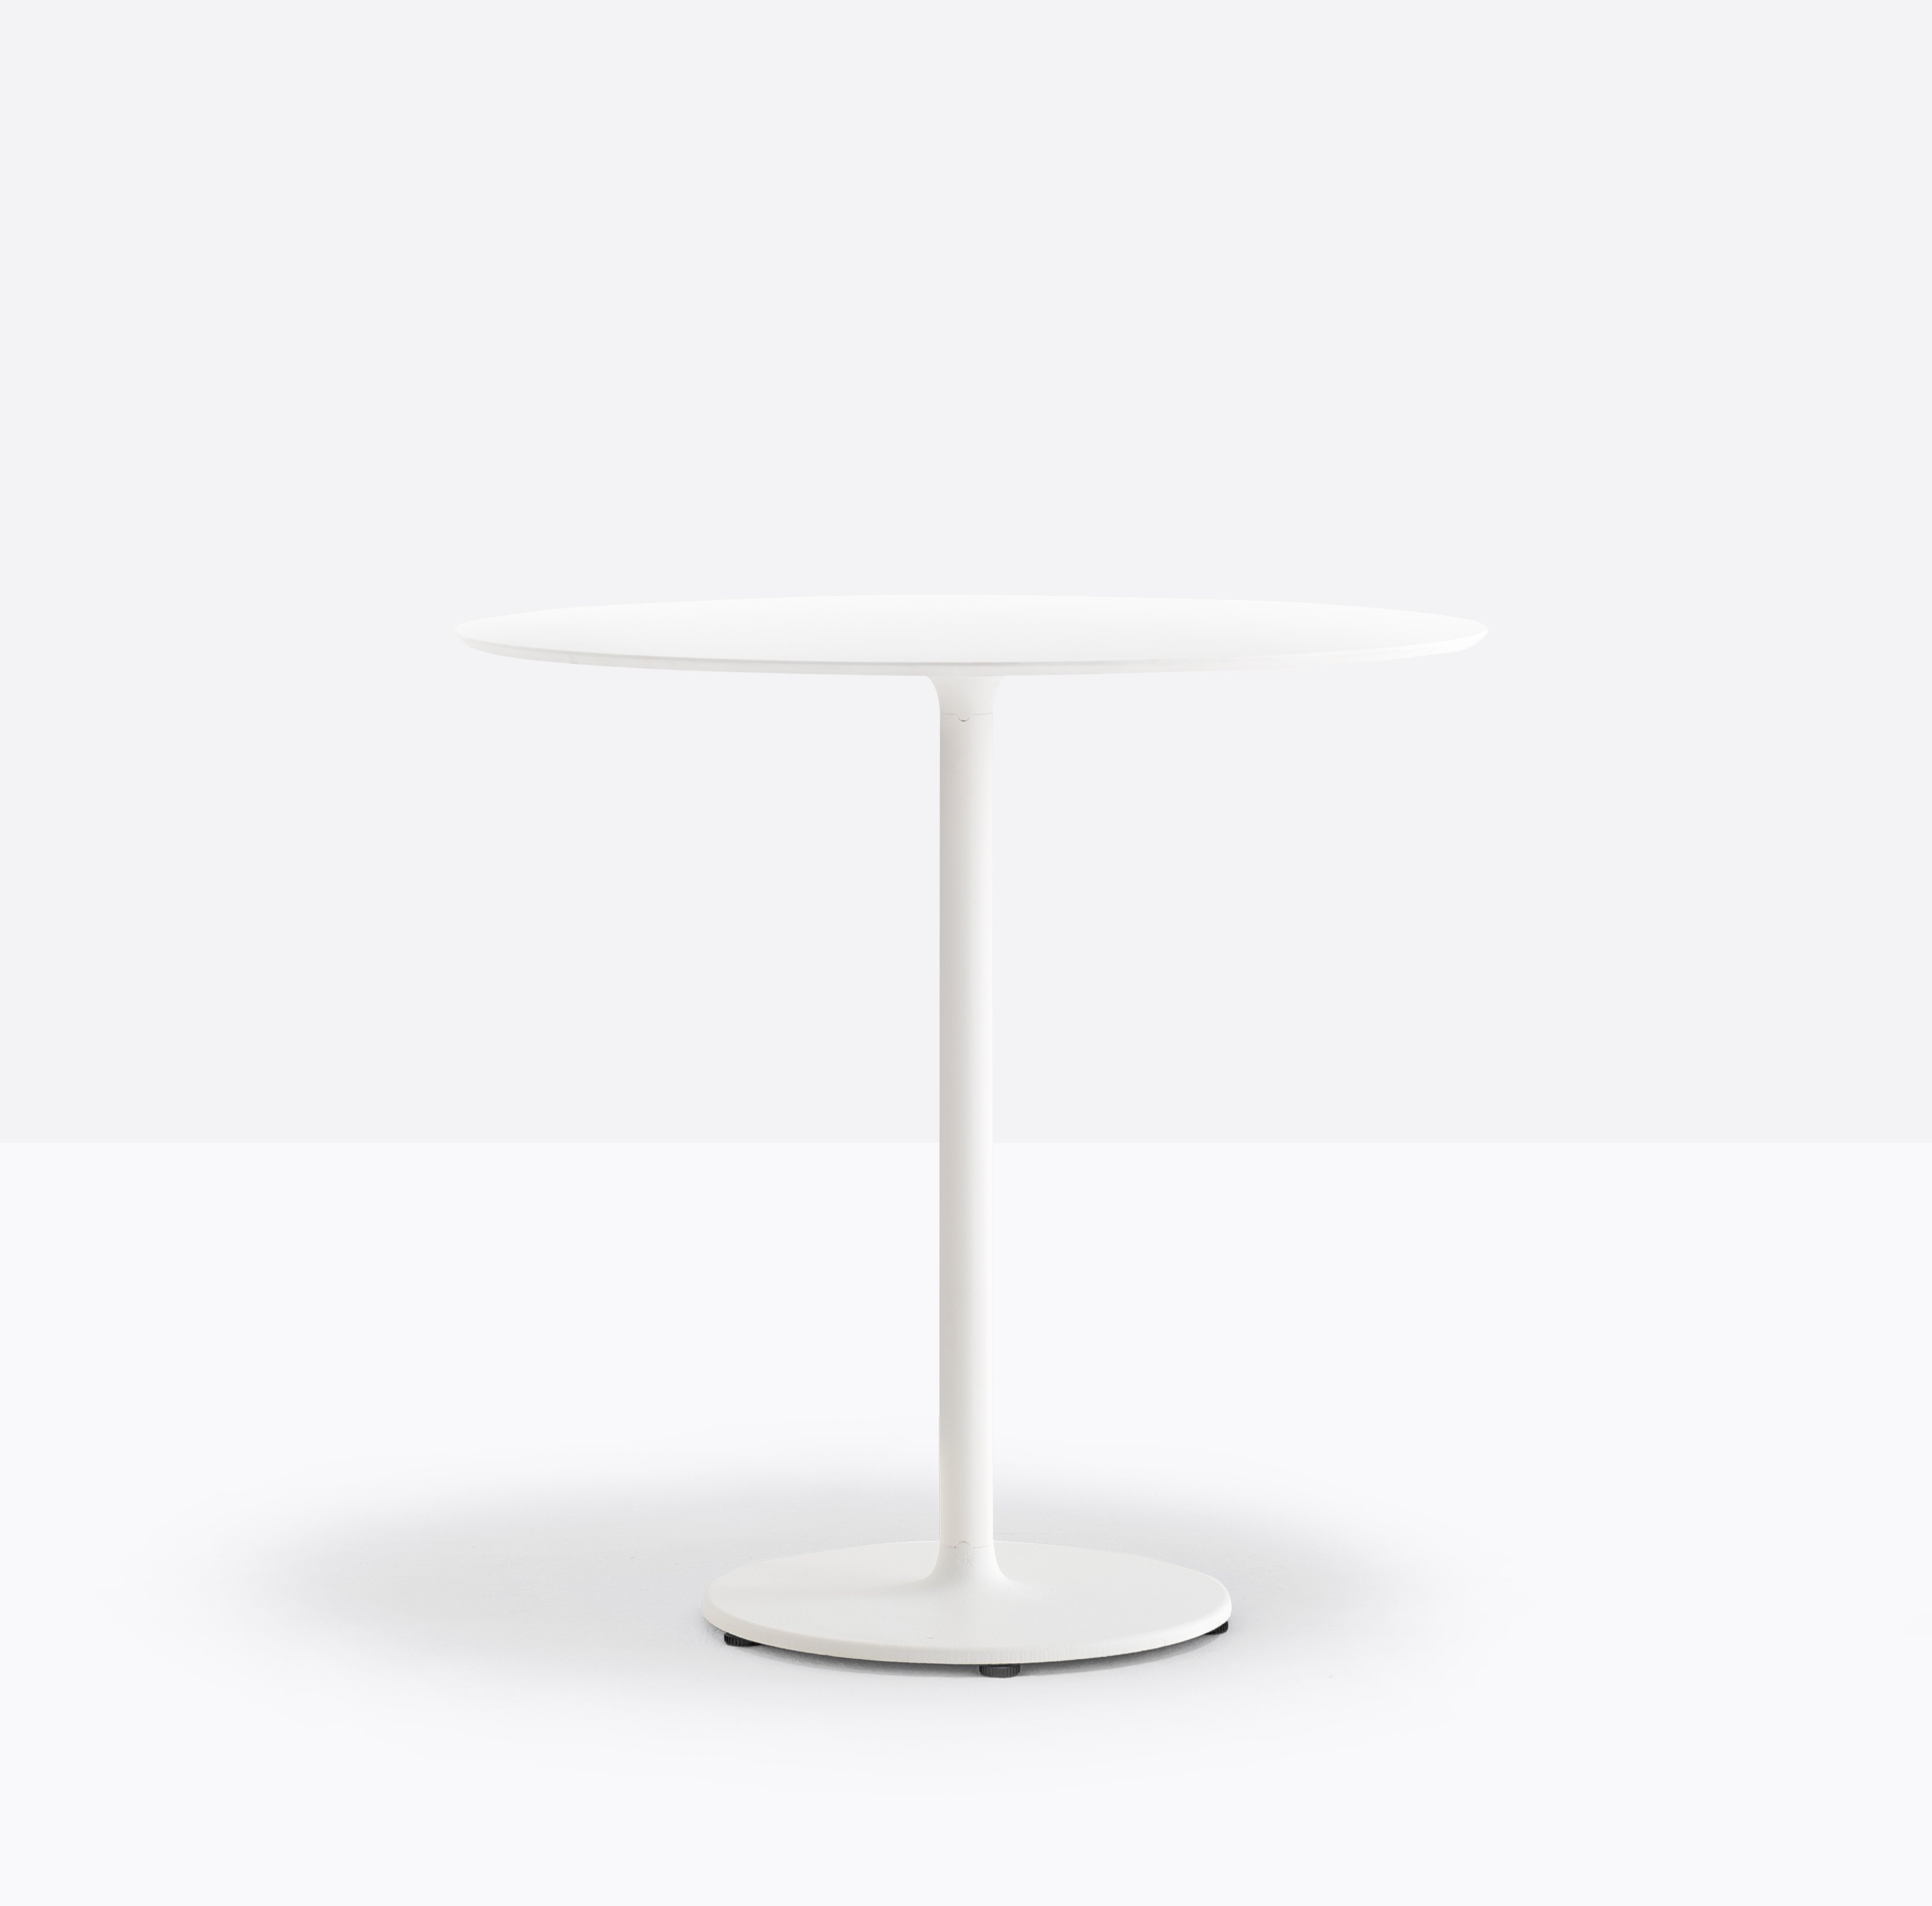 Stylus 5402 Table dining from Pedrali, designed by Pedrali R&D